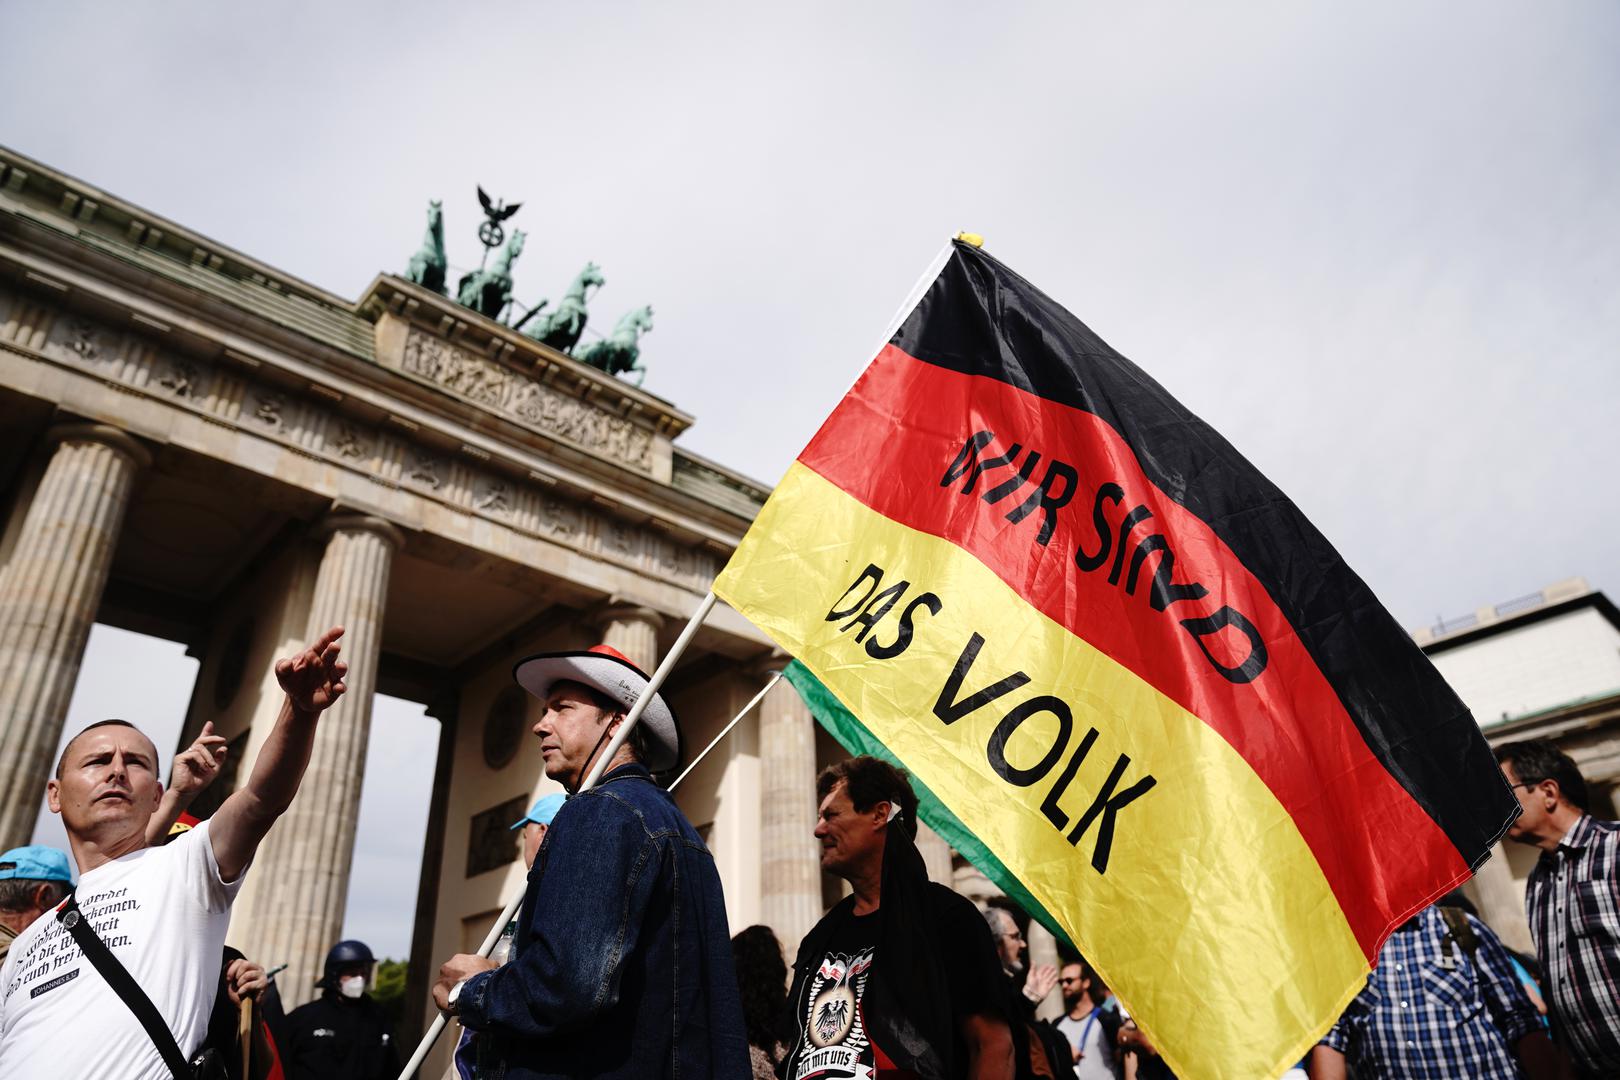 29 August 2020, Berlin: A participant of a demonstration against the Corona measures holds a German flag with the writing "We are the people". Photo: Kay Nietfeld/dpa /DPA/PIXSELL